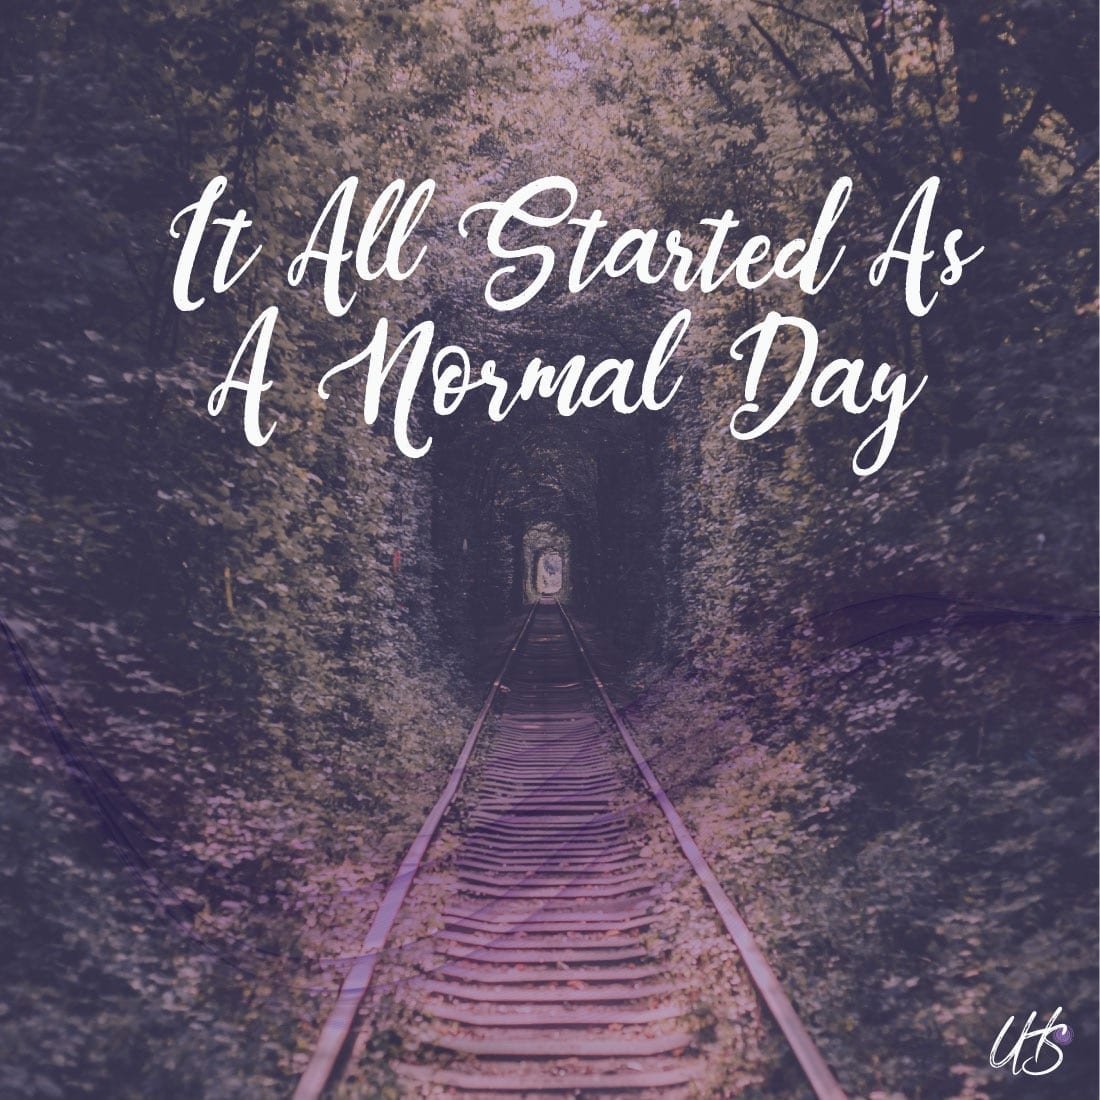 It All Started As A Normal Day